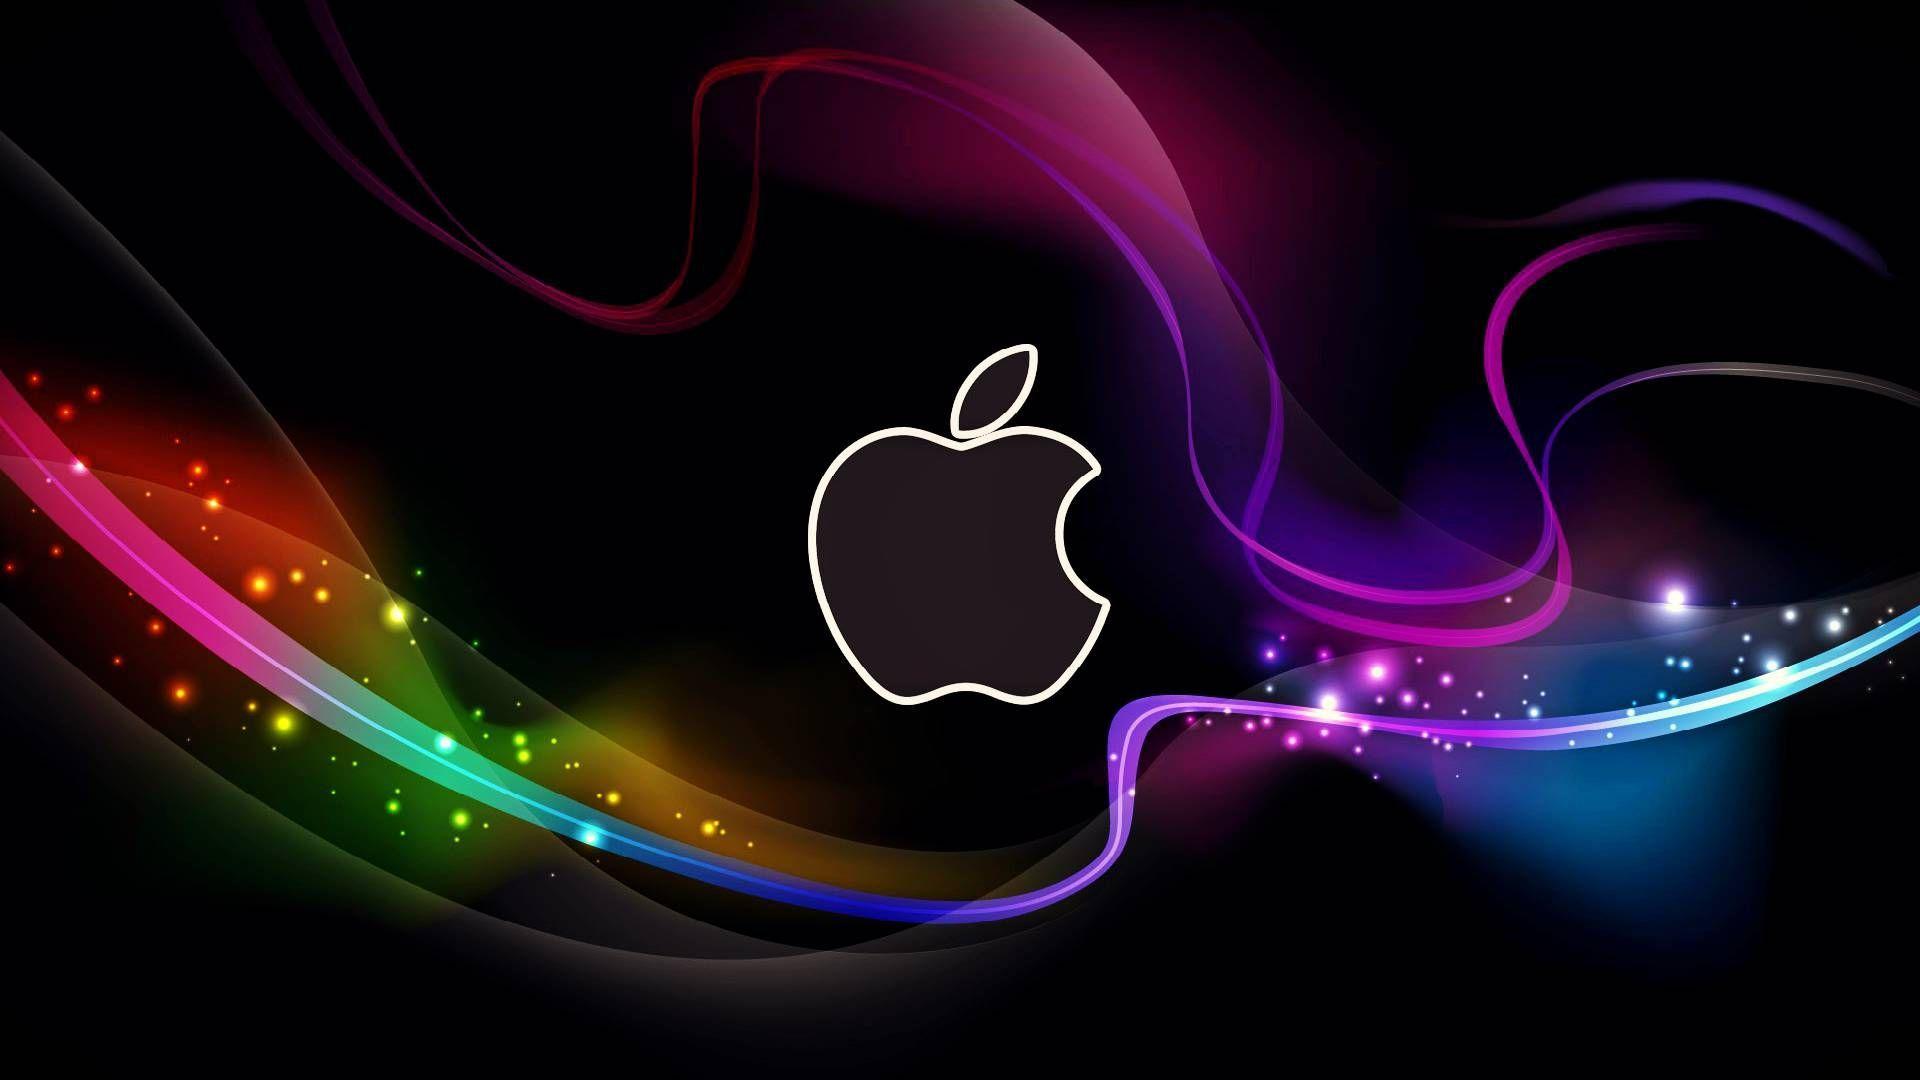 HD Cool Apple Logo with Abstract Background Wallpaper Desktop